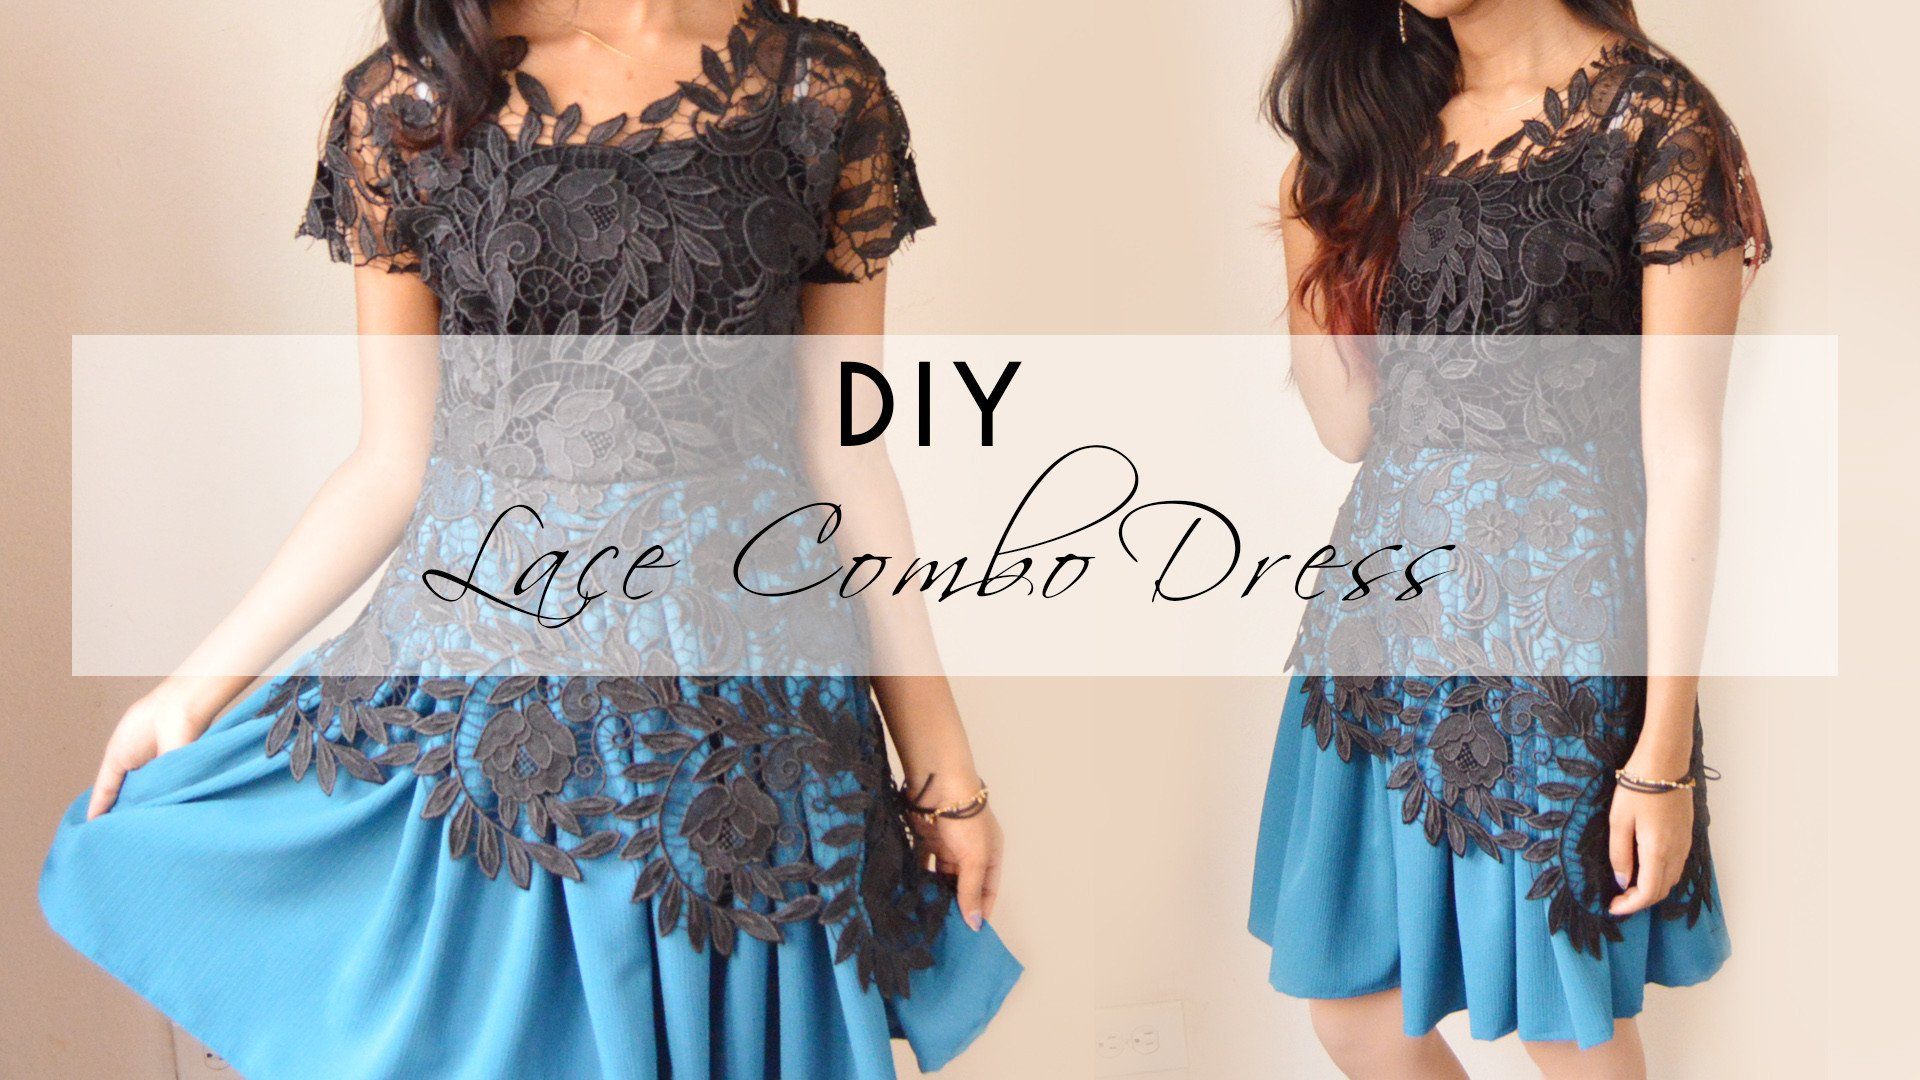 How to Sew a Lace Overlay on a Dress or a Top: Sewing Tutorial